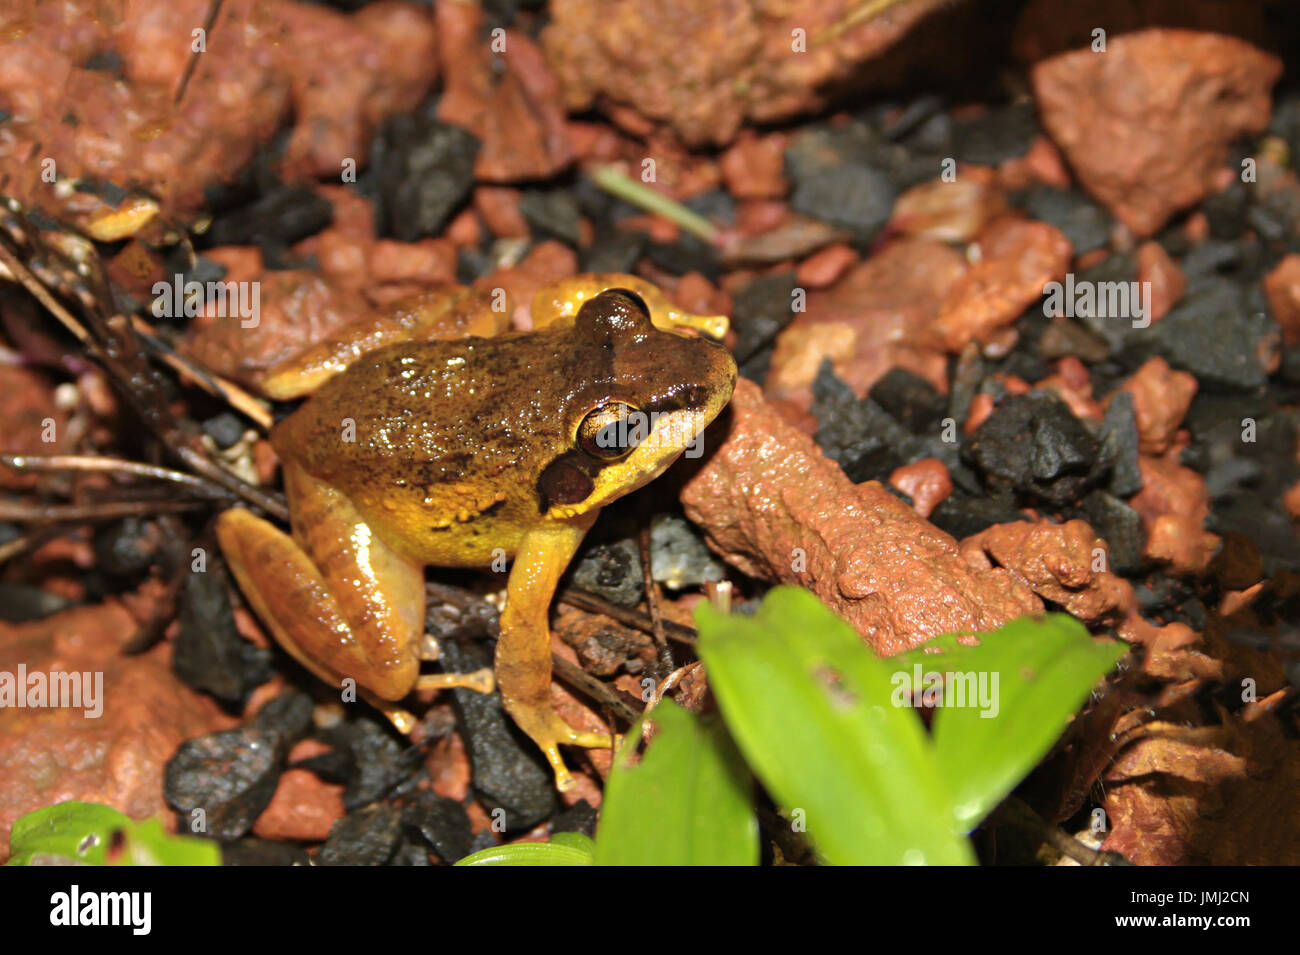 Amboli Leaping Frog Banque D'Images